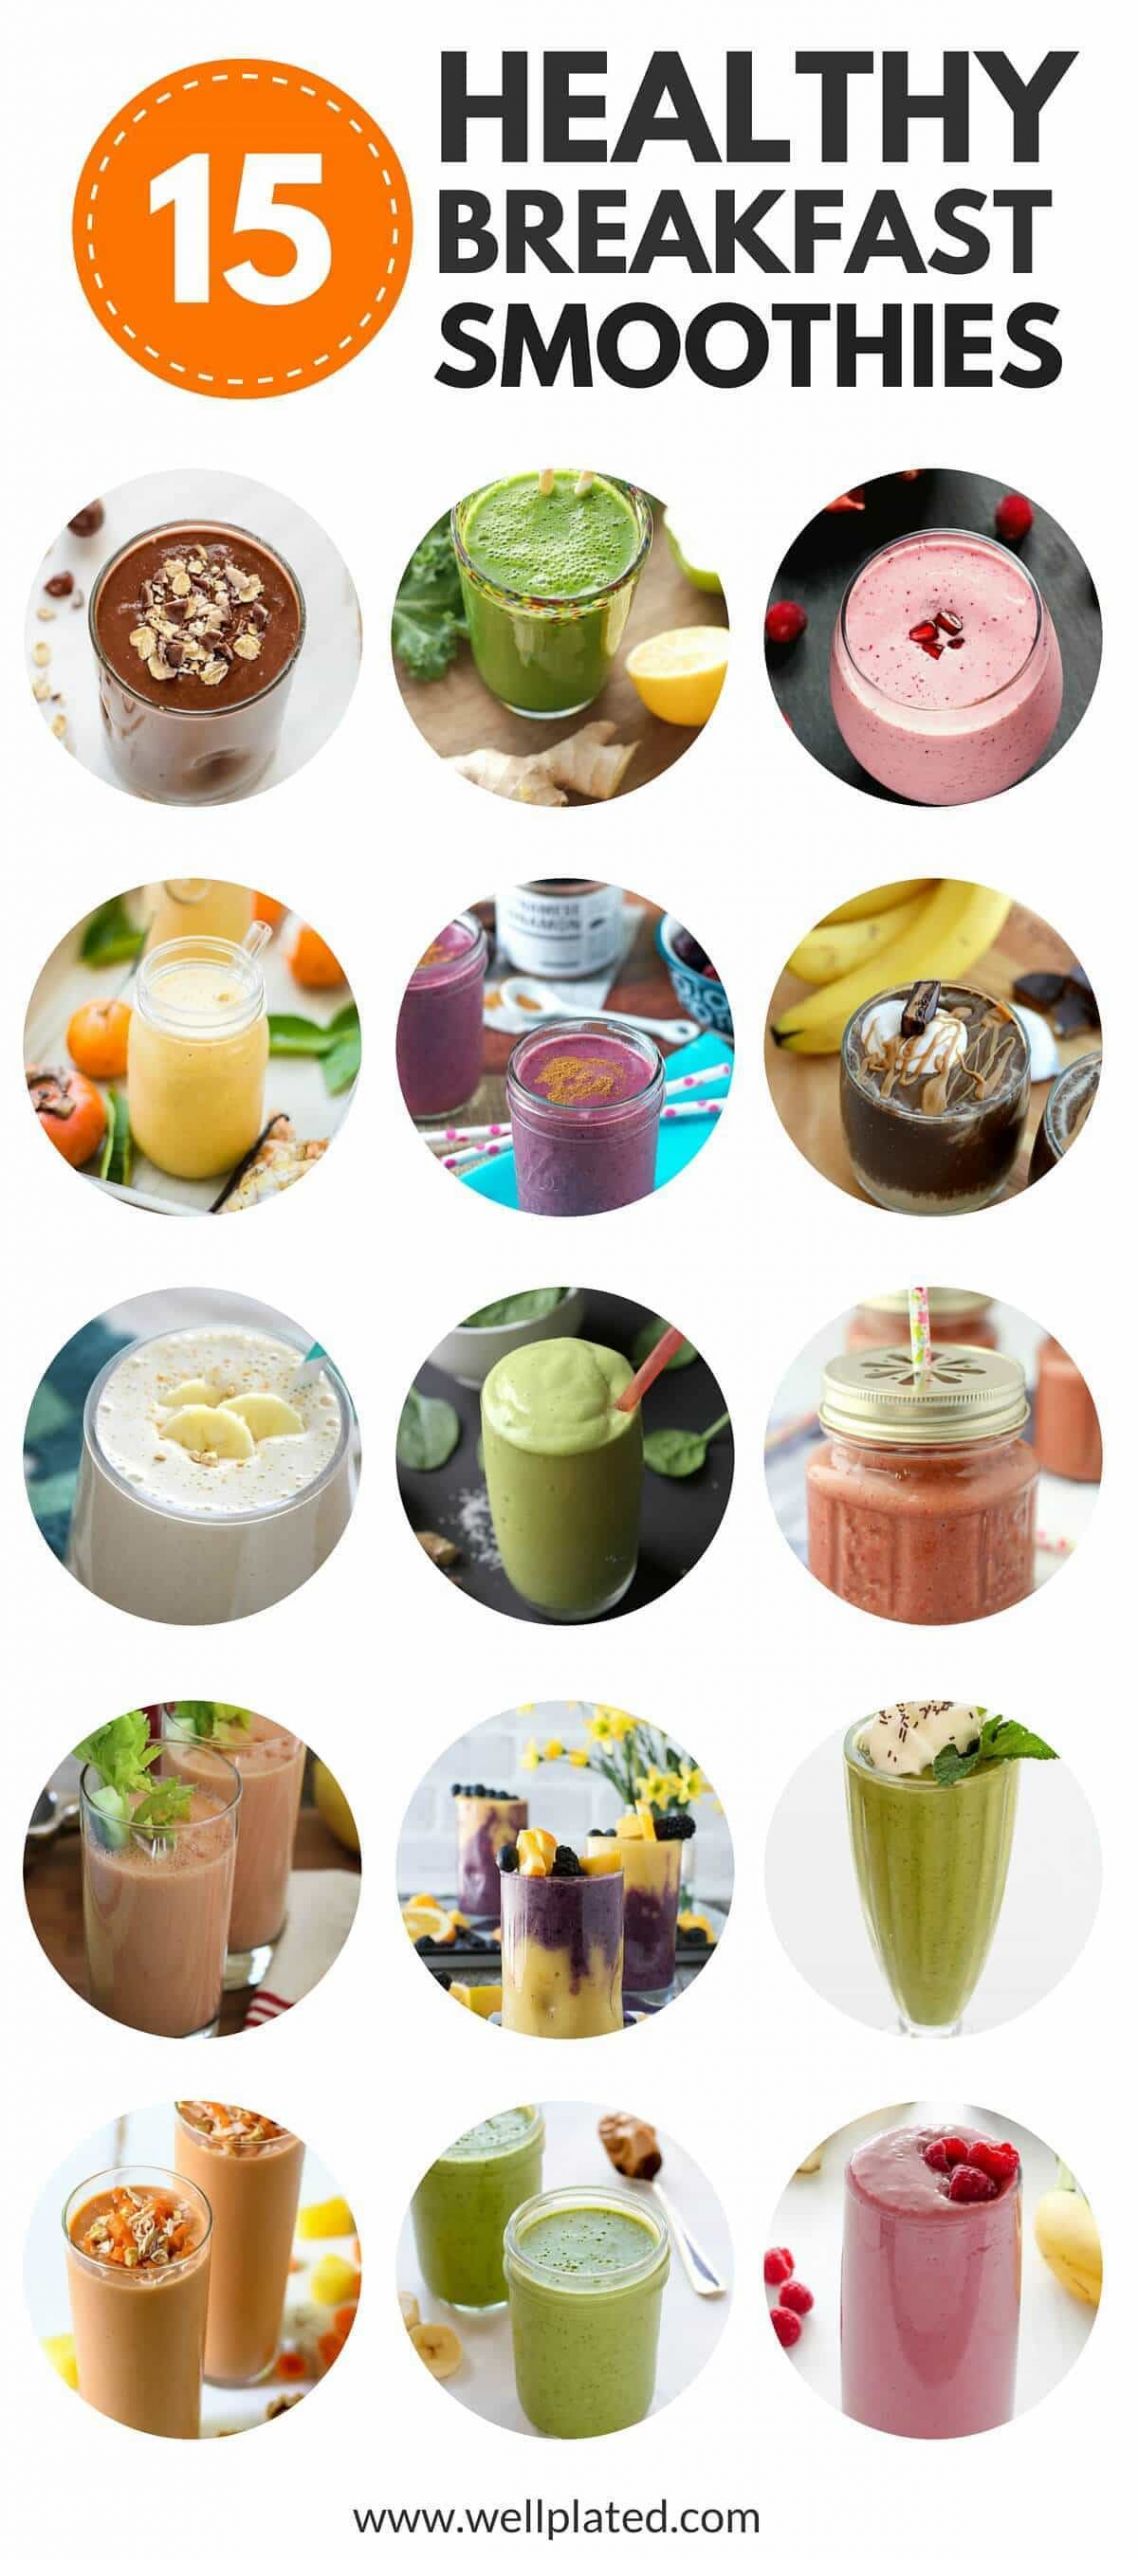 Weight Loss Breakfast Recipe
 The Best 15 Healthy Breakfast Smoothies